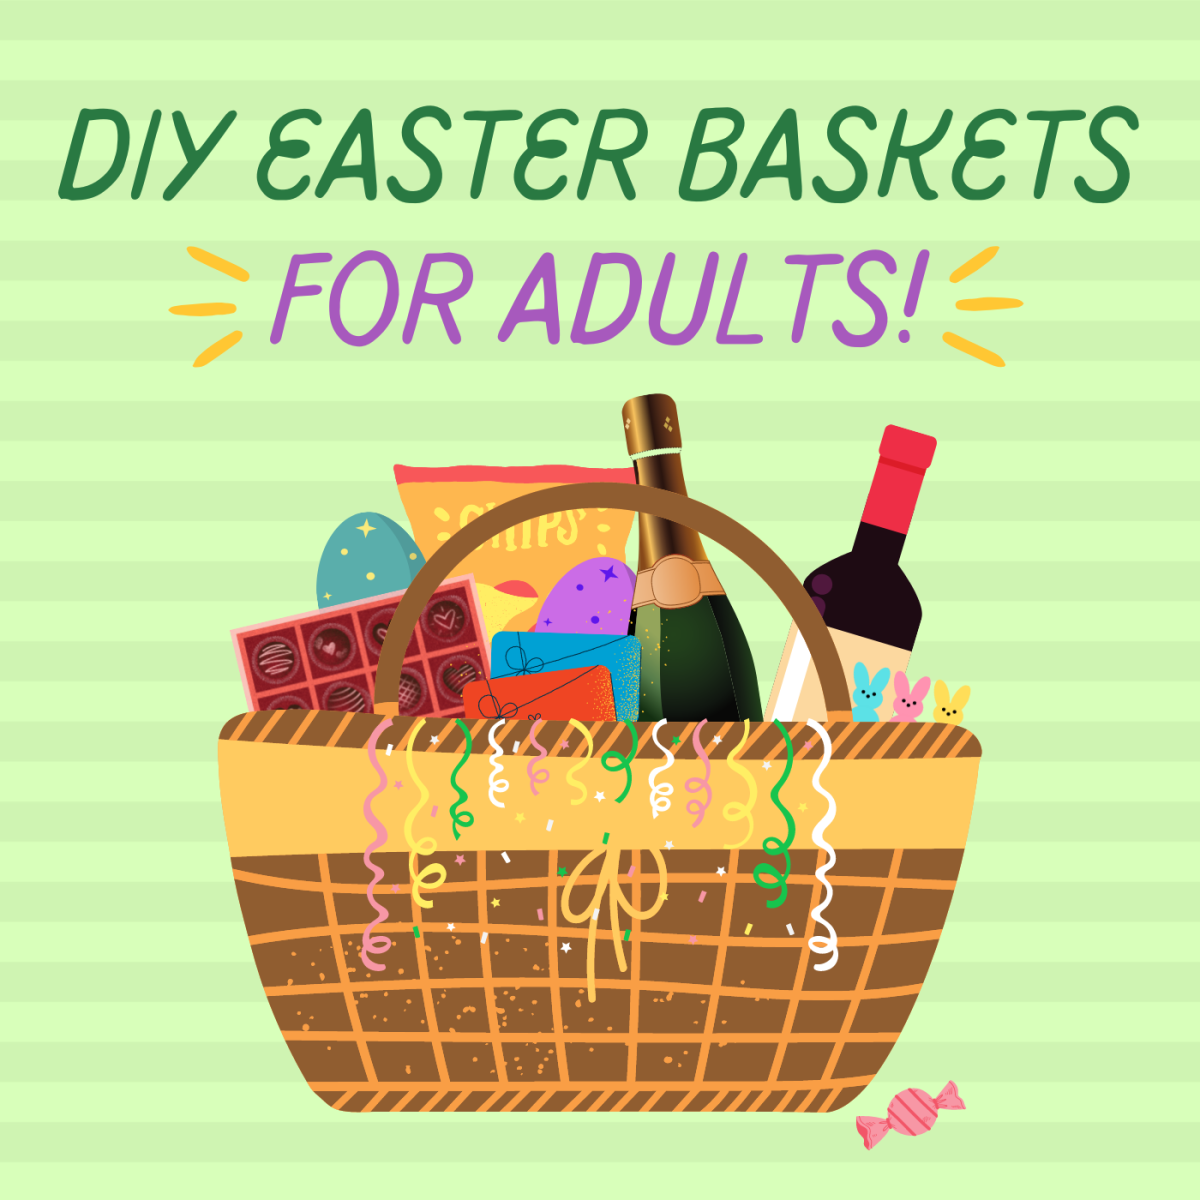 Treat the adults in your life to a grown-up Easter basket this year! Wine bottles, gift cards, and high-quality chocolates are all great filler ideas.